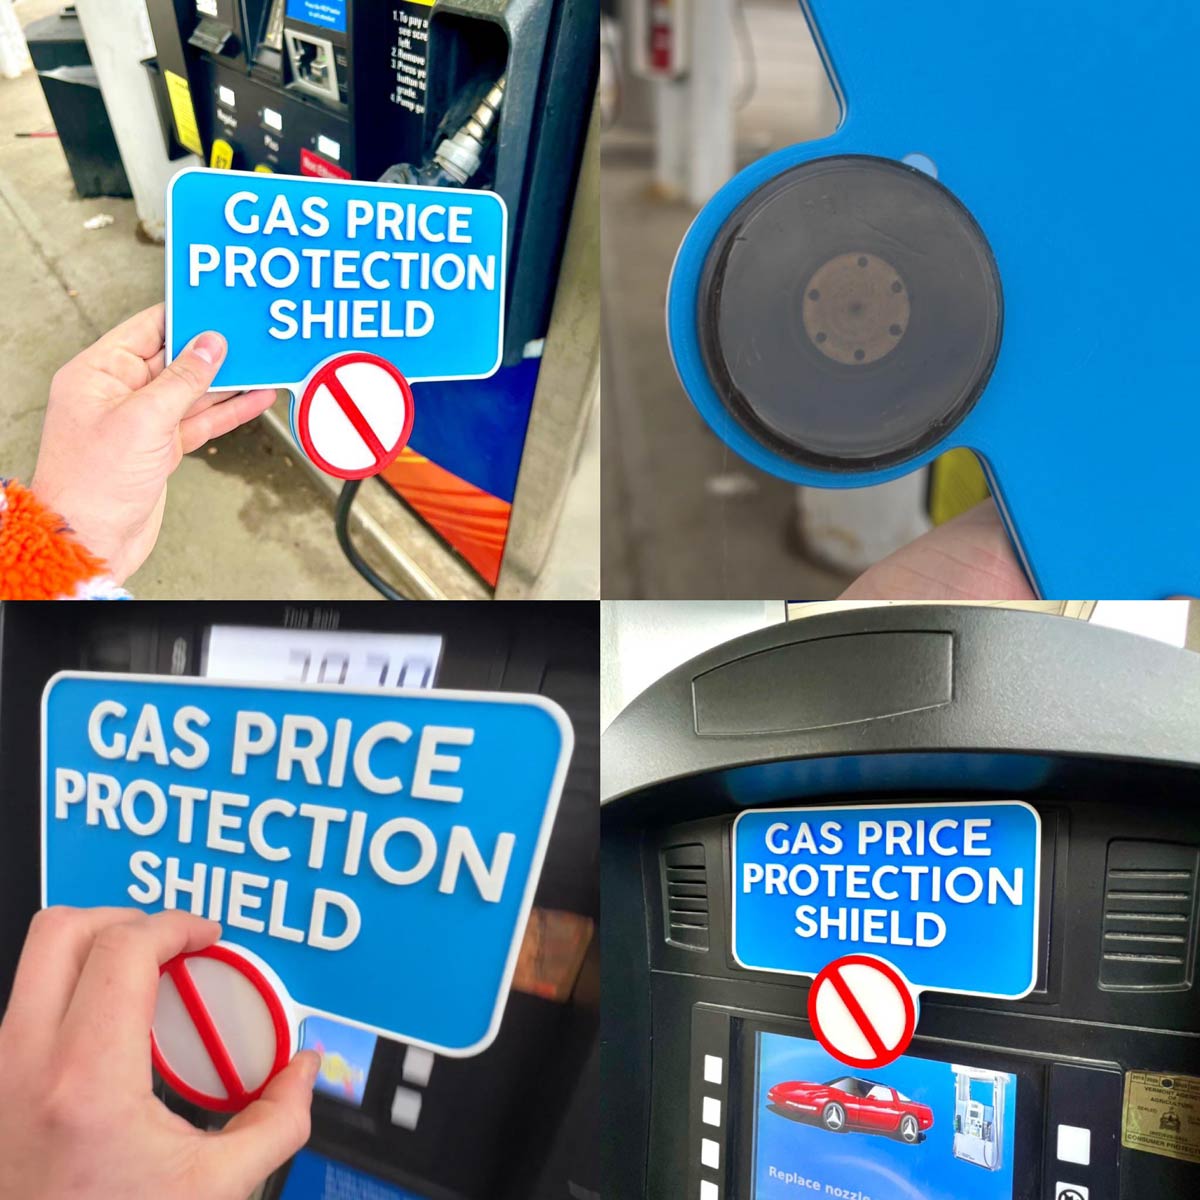 I invented the Gas 'Price Protection Shield' to help ease the pain at the pump these days